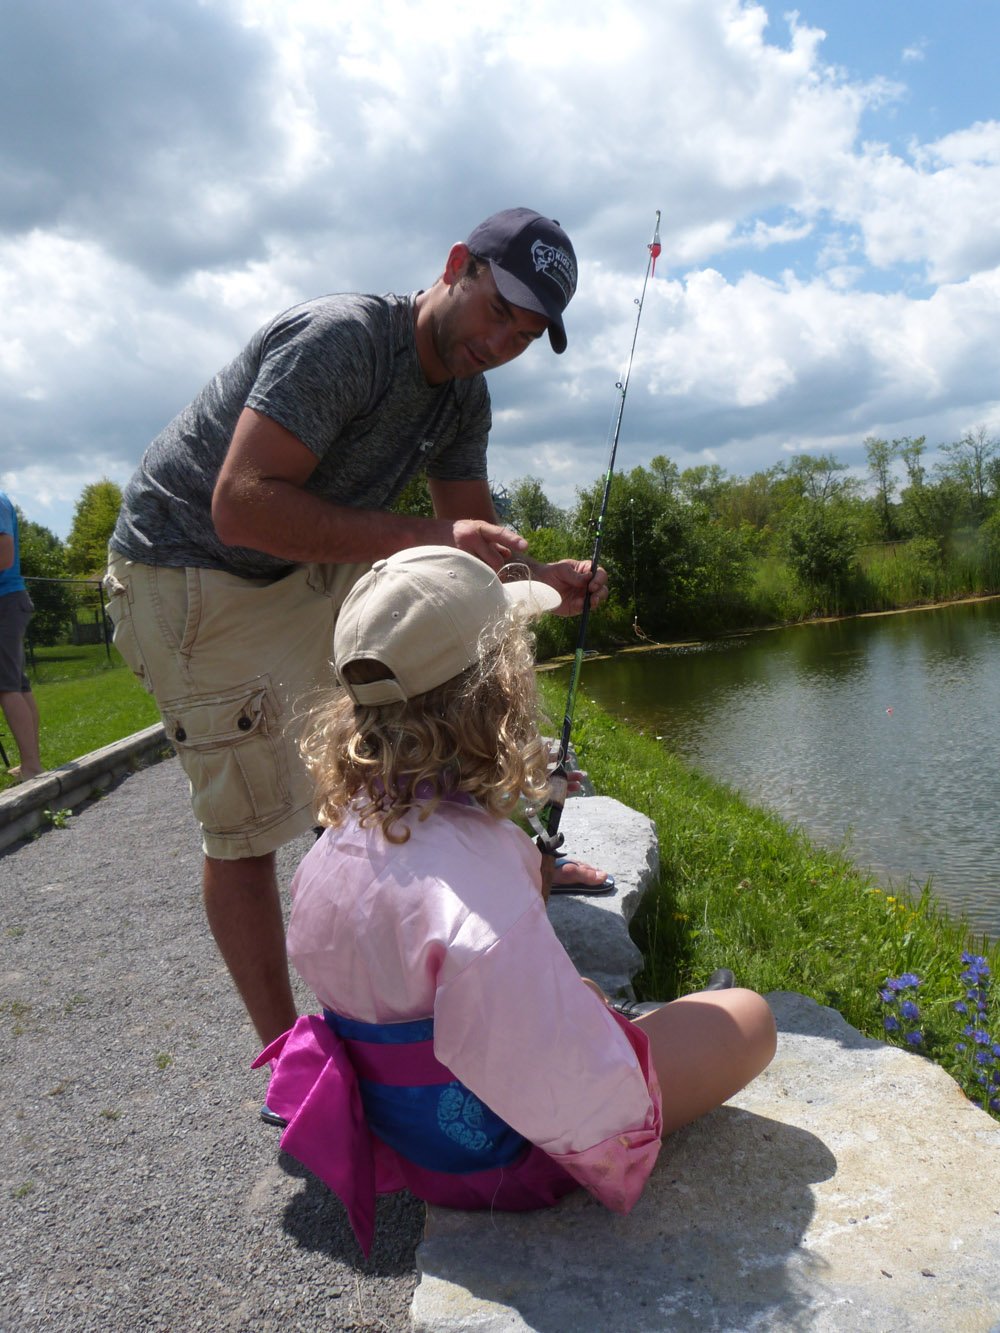 A Peterborough Police Officer showing a fisihing rod to a small child in front of a small lake